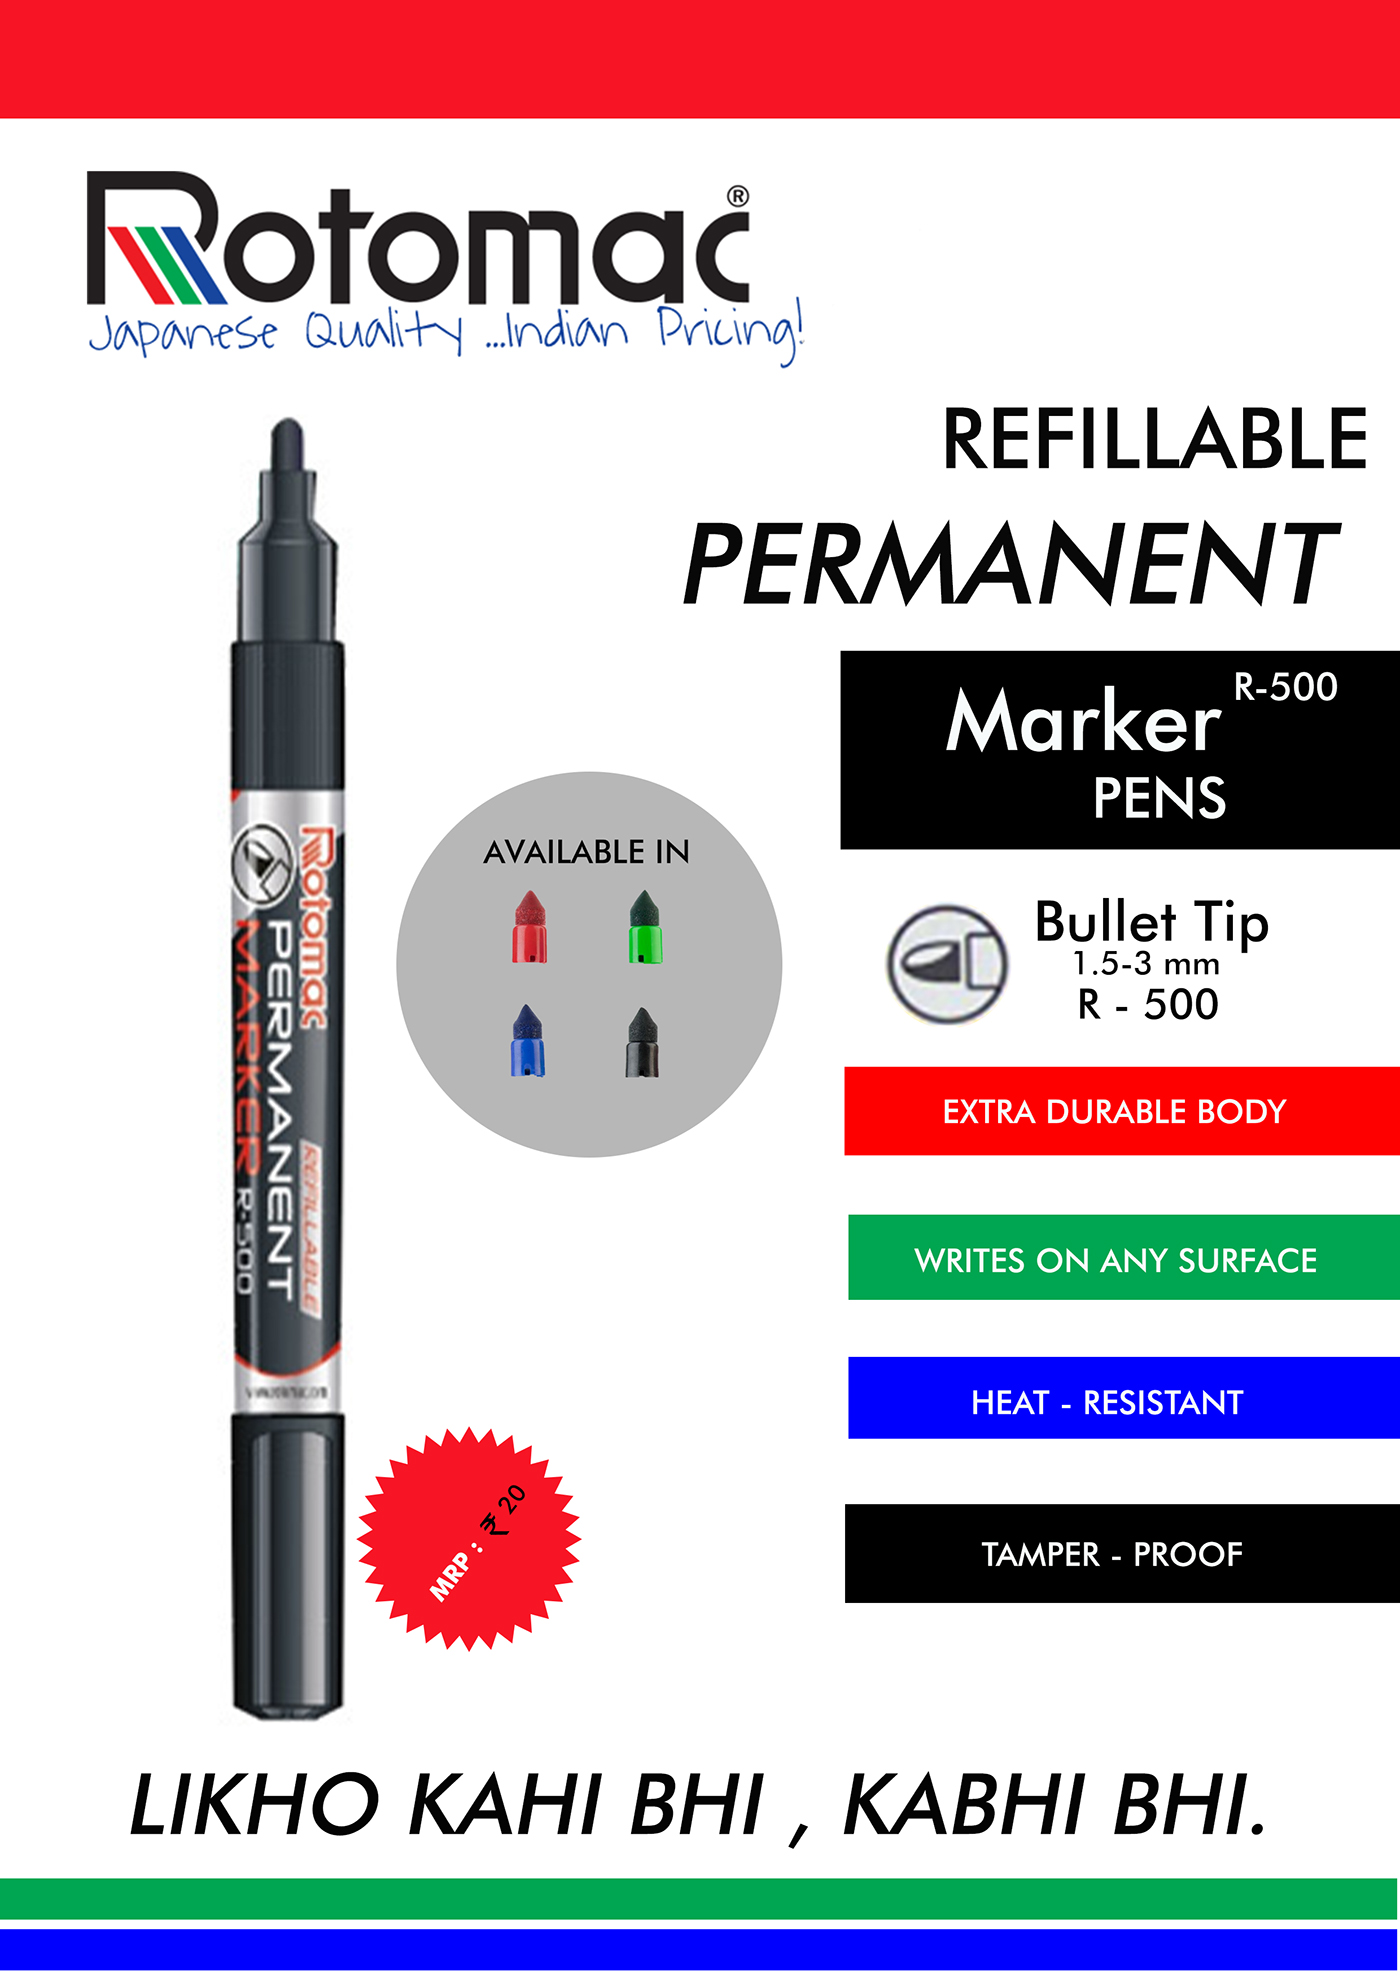 rotomac Newspaper Ad poster marker pens advertisement